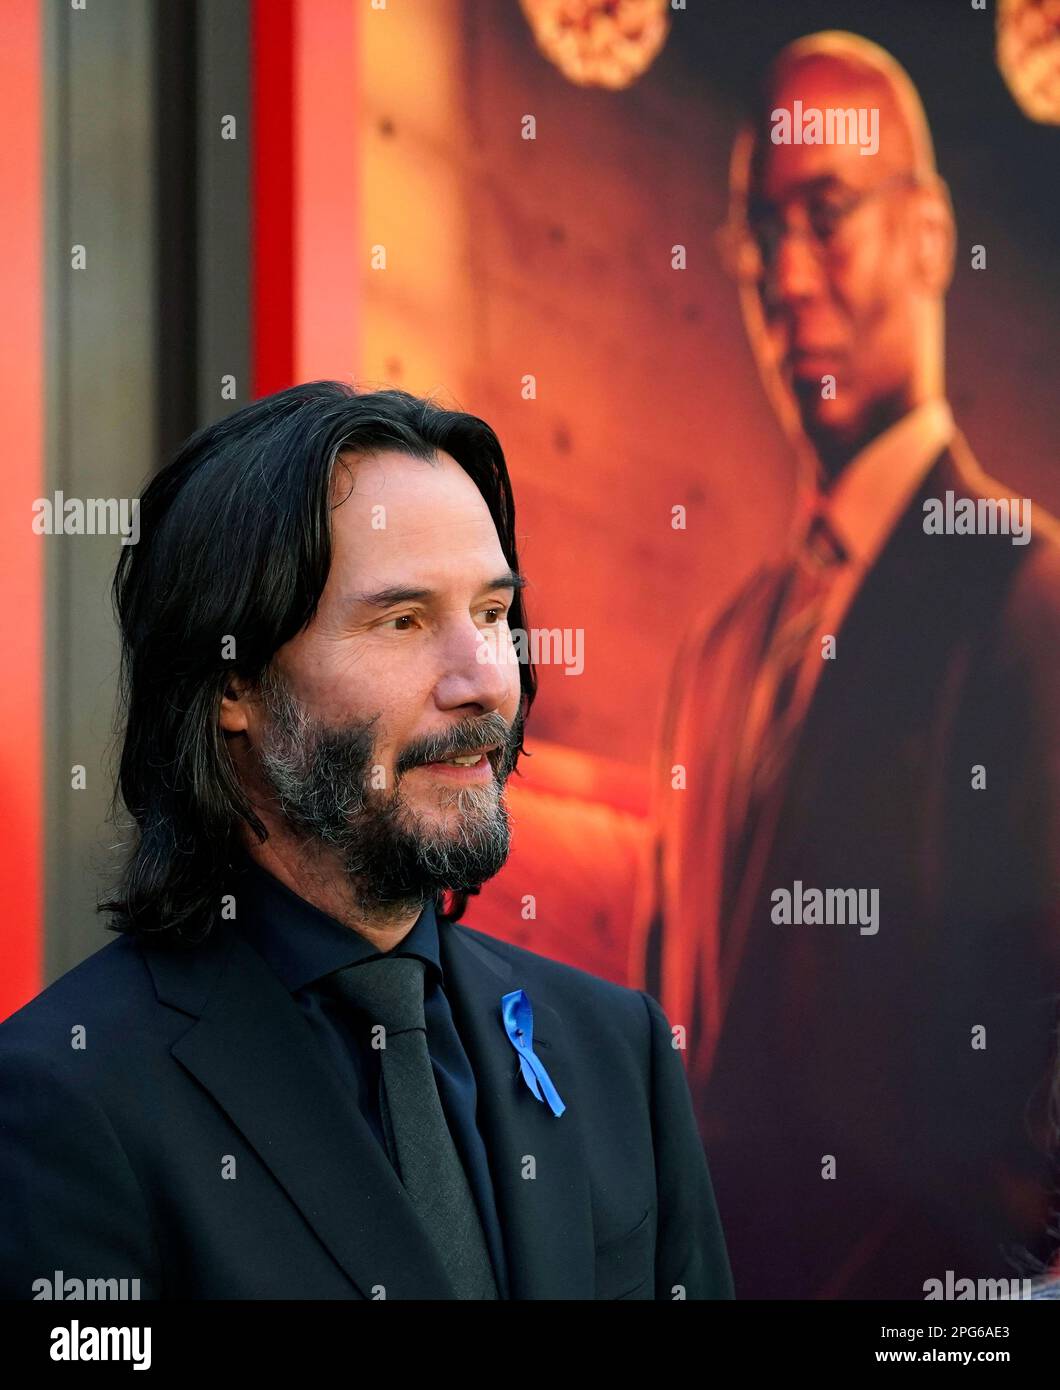 Keanu Reeves and Cast 'John Wick: Chapter 4' Character Posters